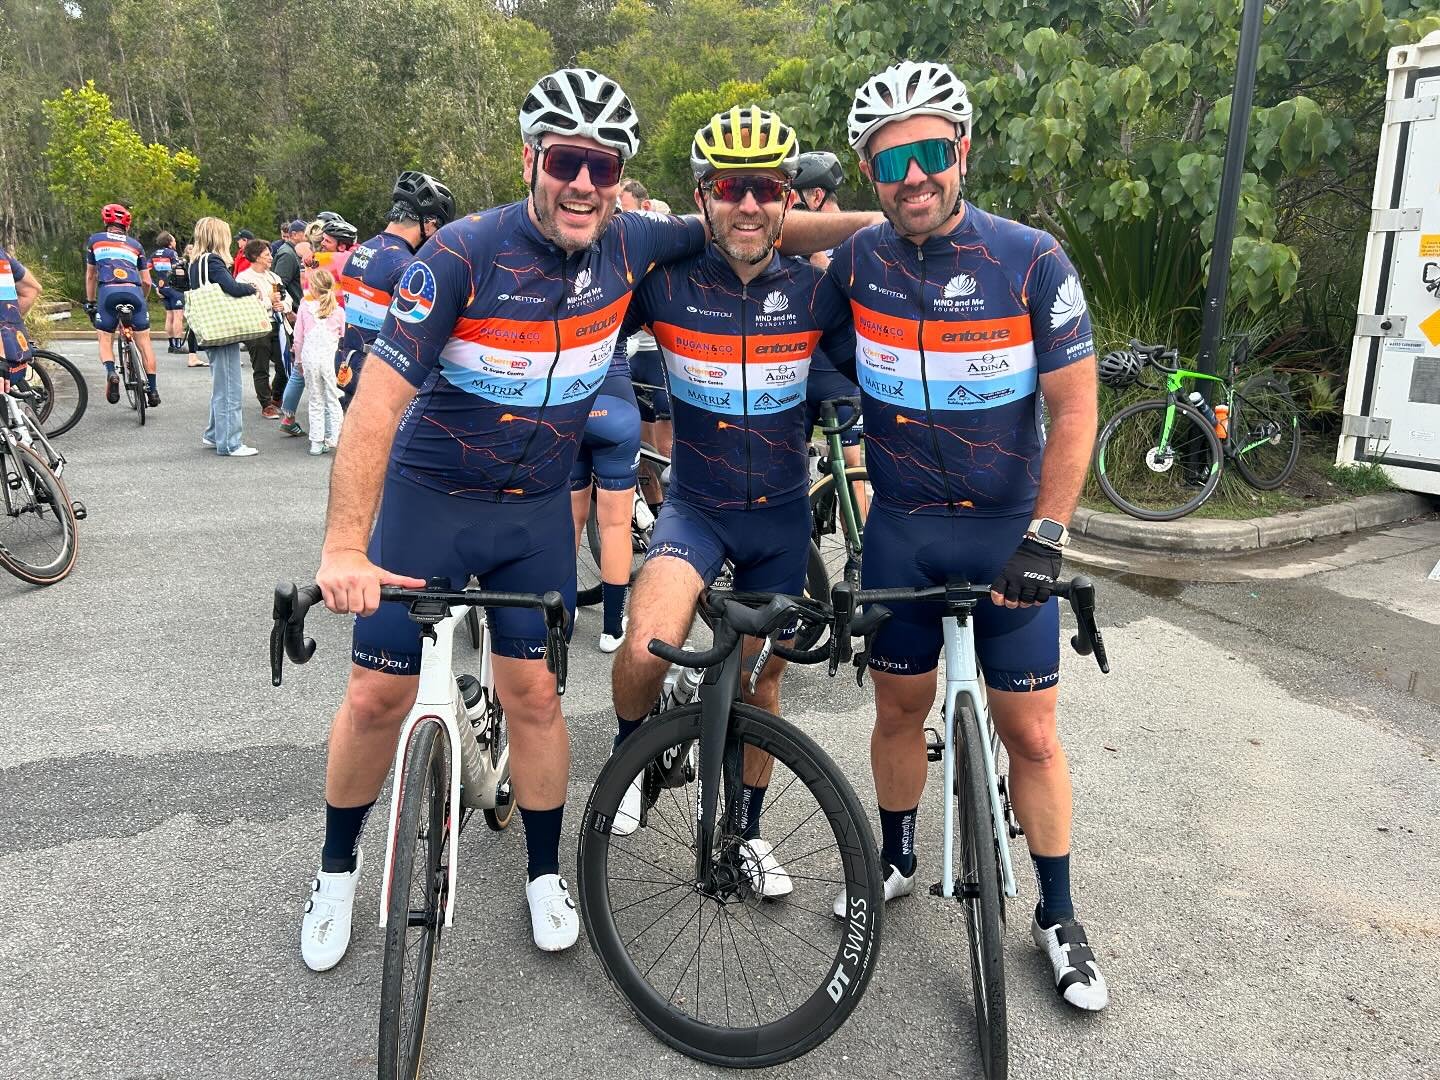 Thanks to the many Suppliers/Subcontractors/Family that supported me on the #mndandmefoundation ride from Yatala to Bryon Bay. 170km 🚲 completed in the Rain 🌧️ &amp; Sun ☀️ to support a great cause.  #nestbespokehomes were also happy to offer a sup